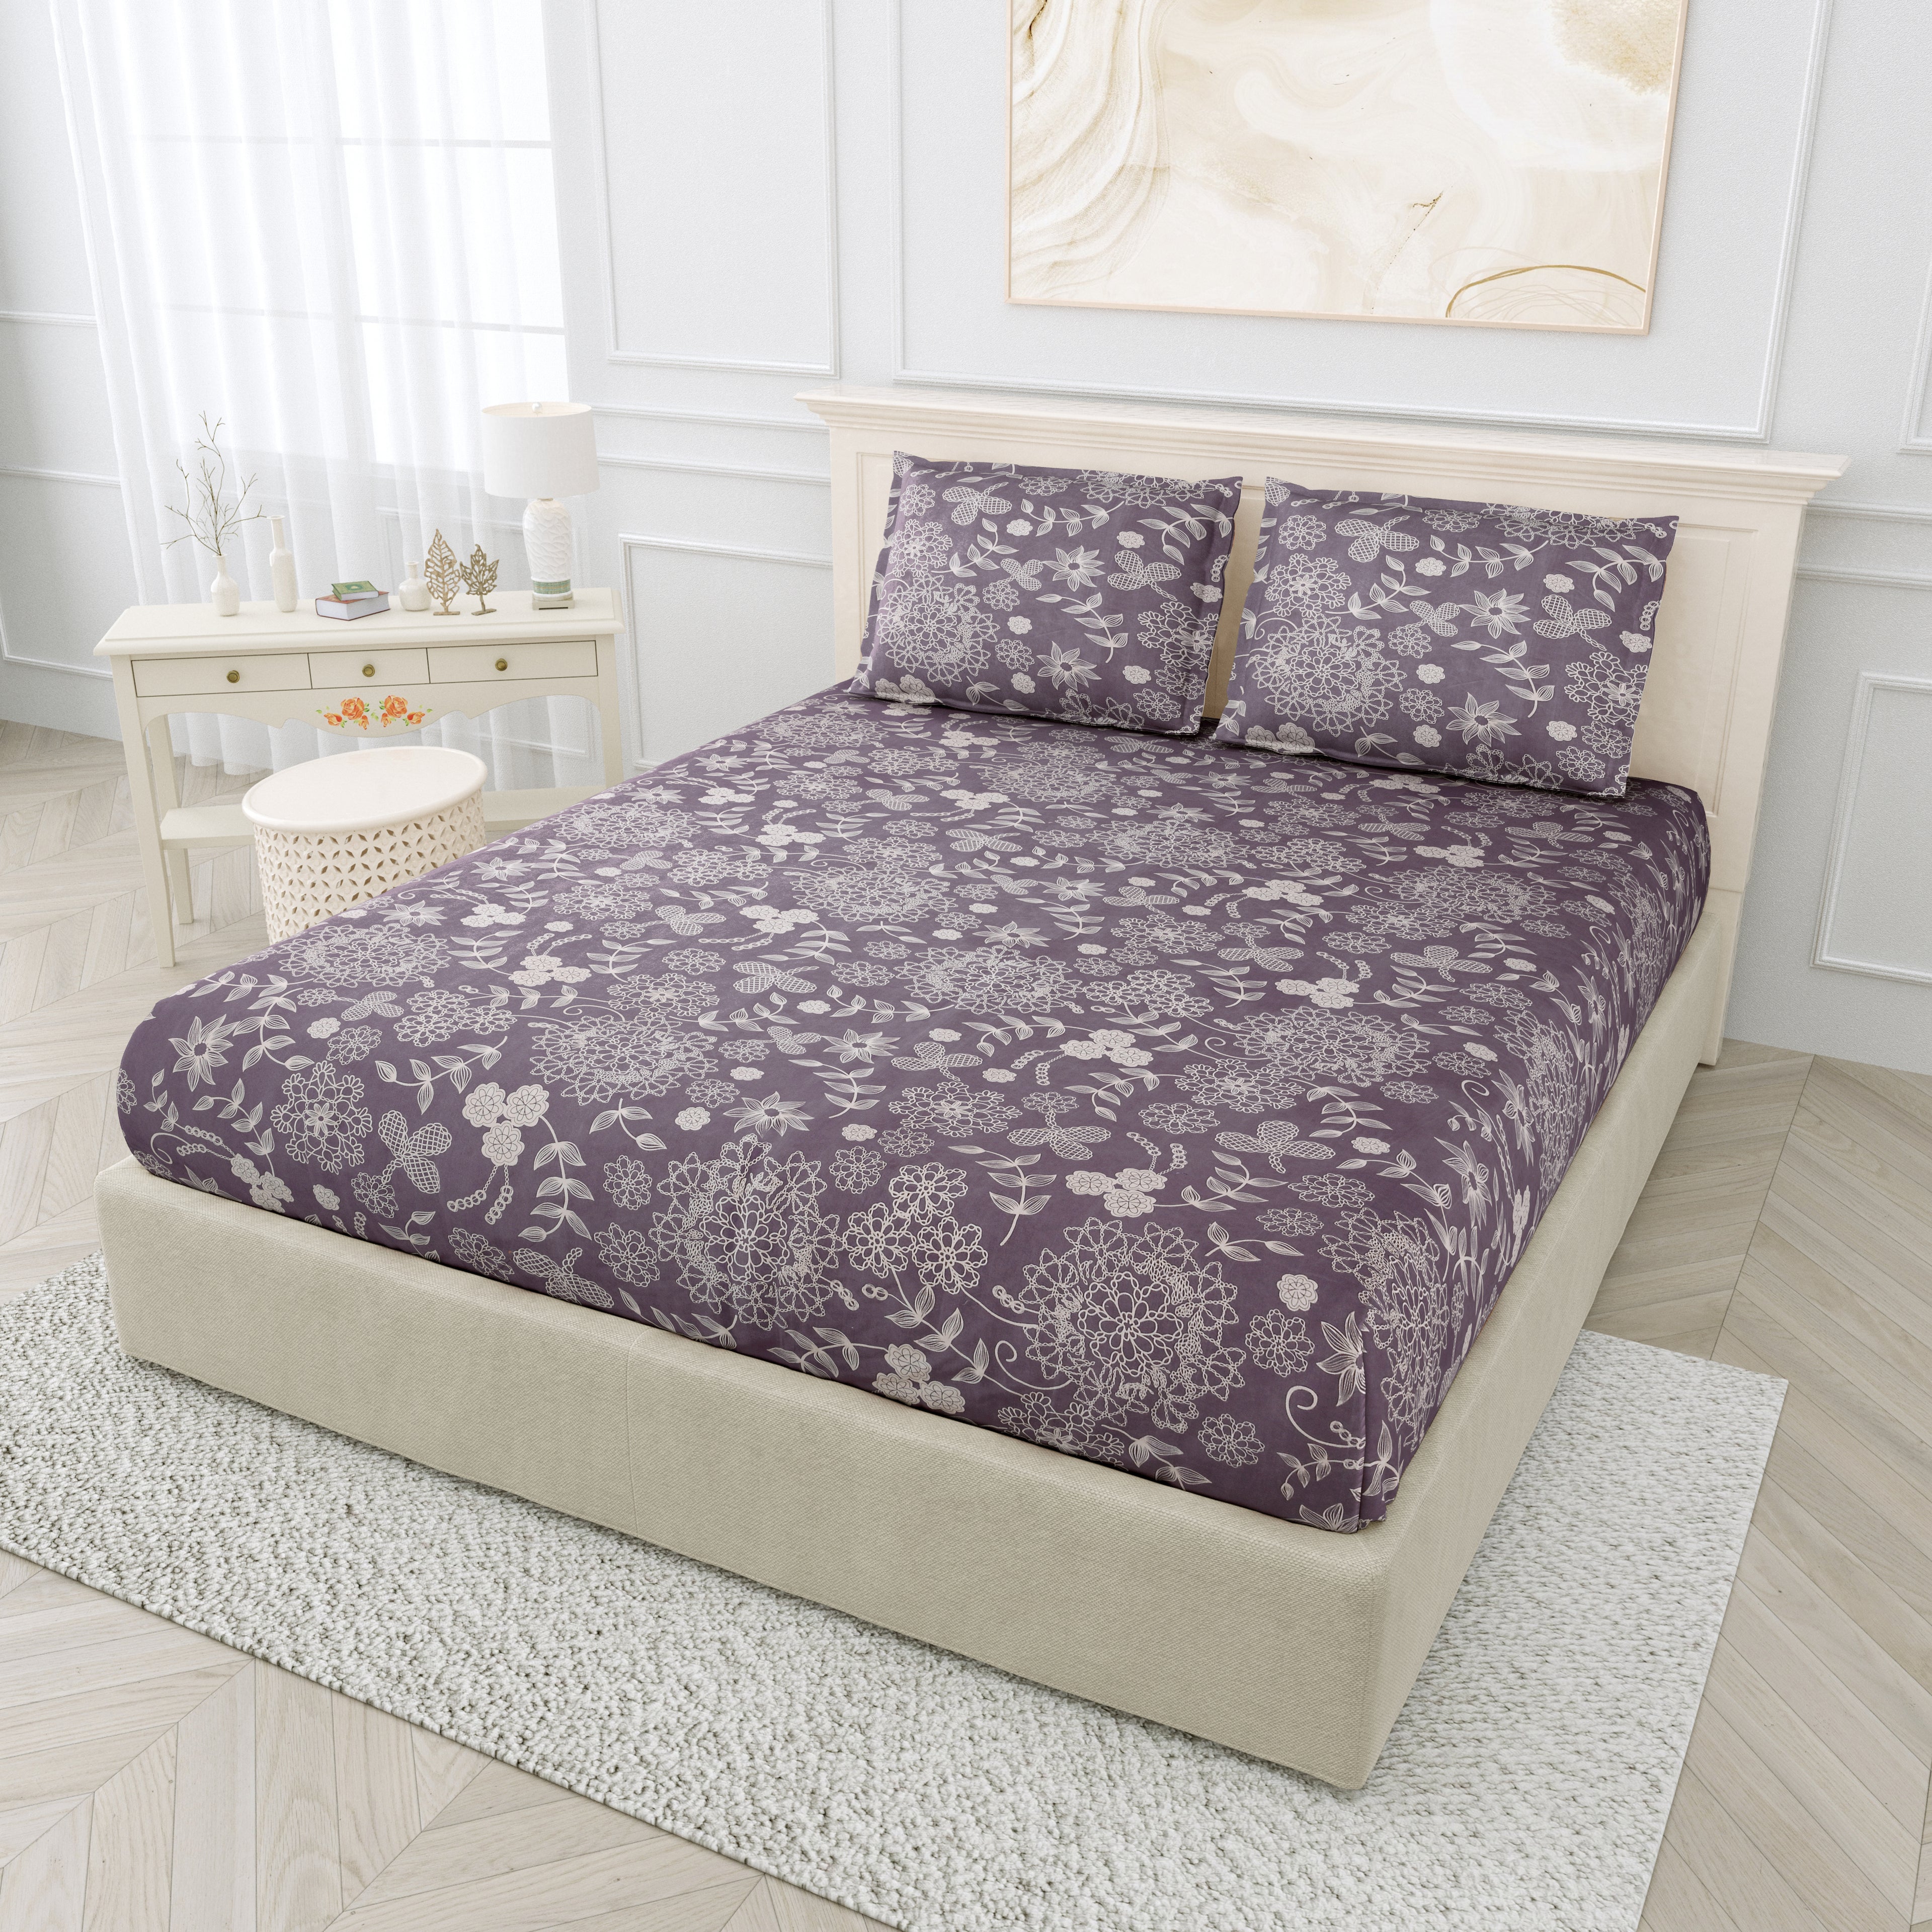 Printed Bedsheet- Double Bed -Gray floral